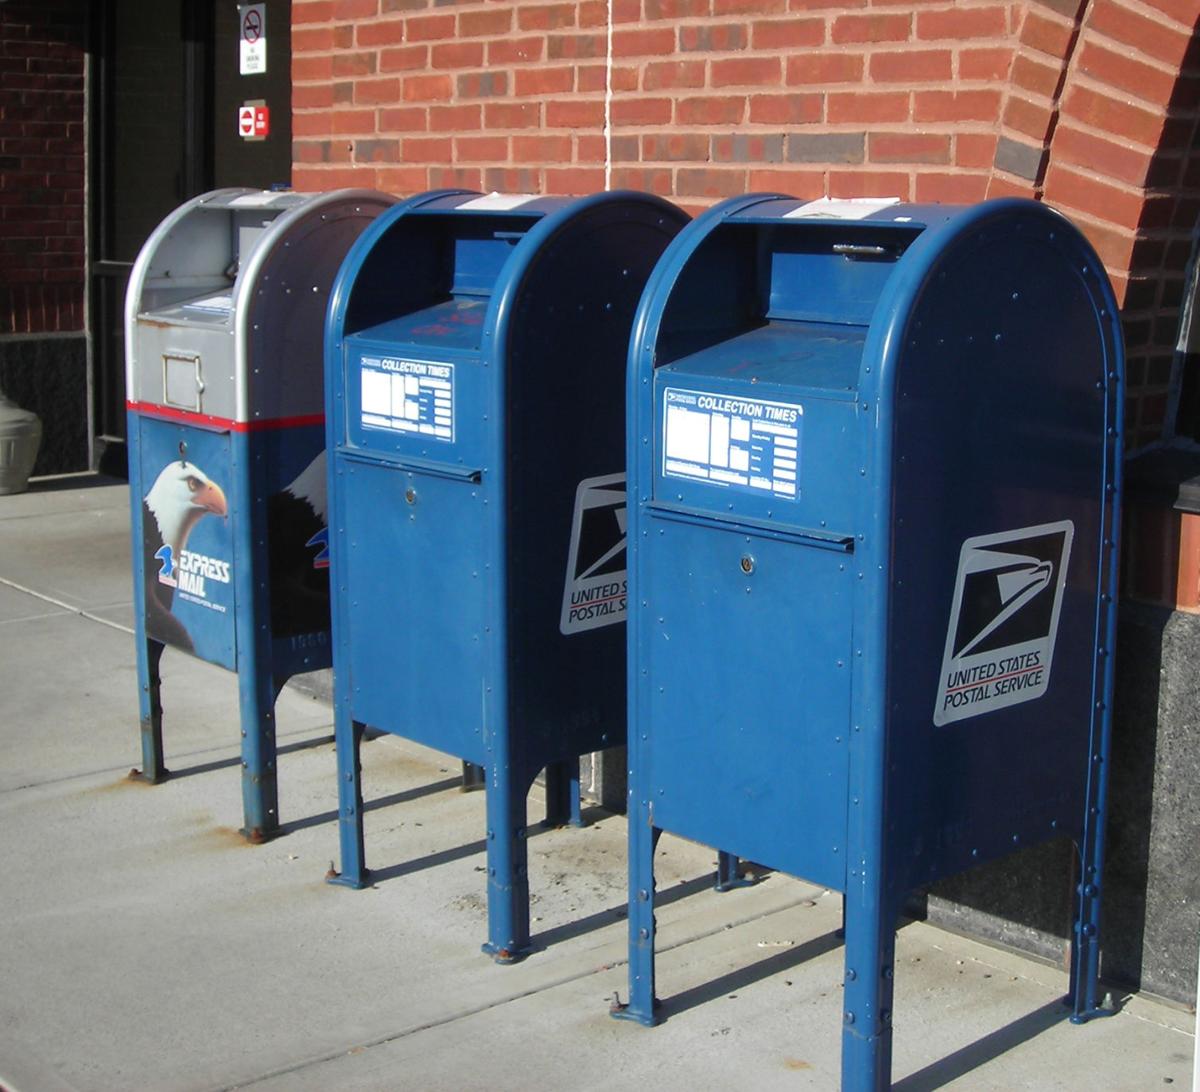 USPS temporarily removes collection boxes, closes some Post Offices early  due to possible civil event 